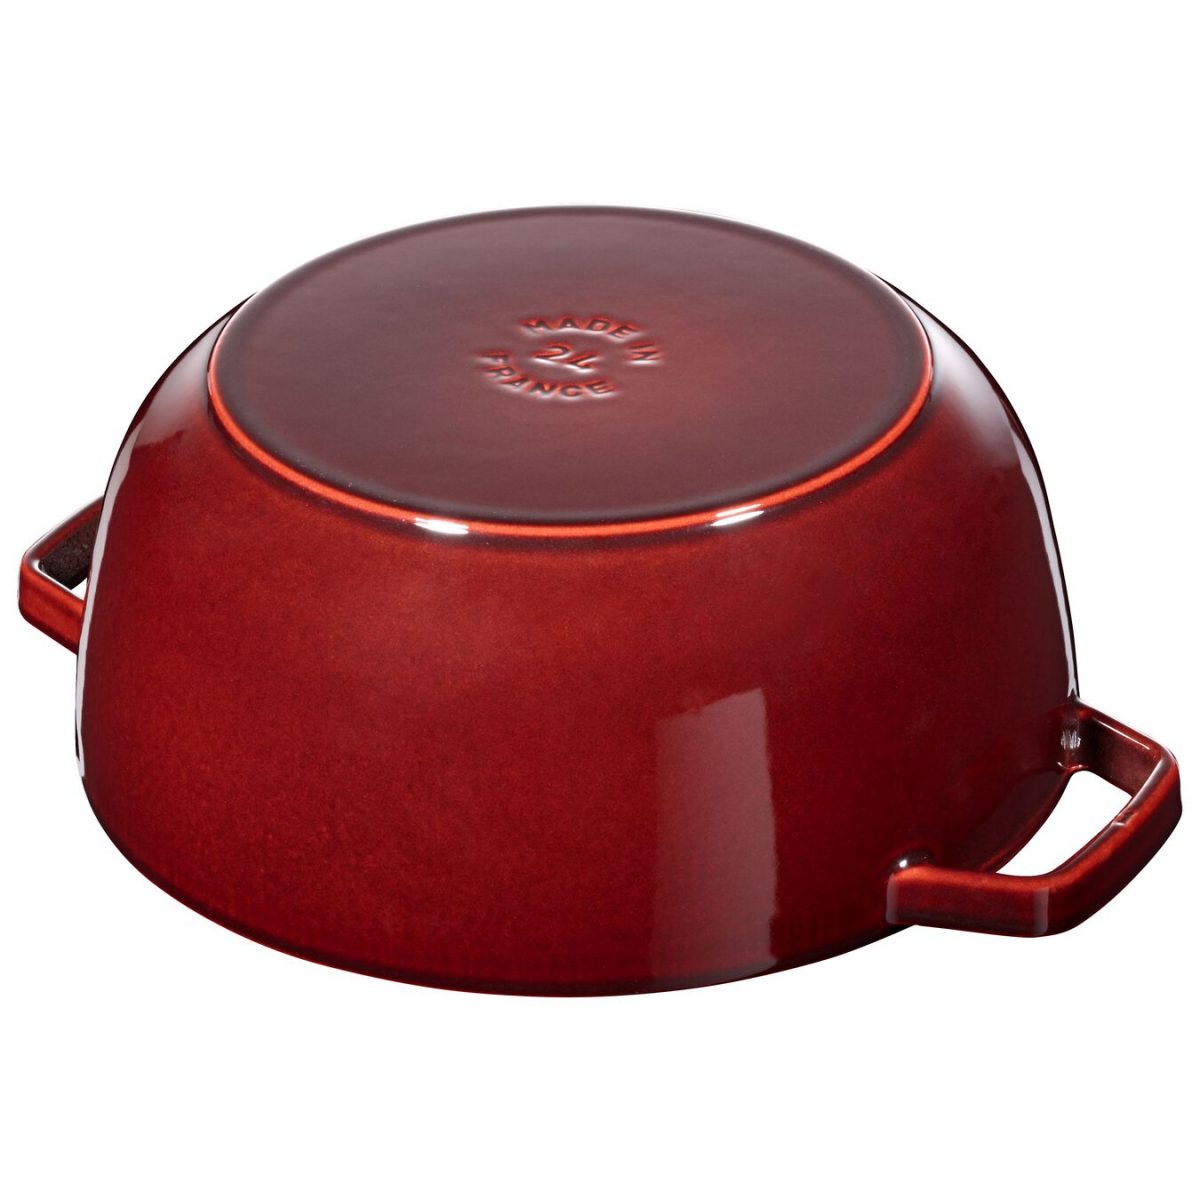 Staub Cast Iron Rooster Cocotte 24 cm 3